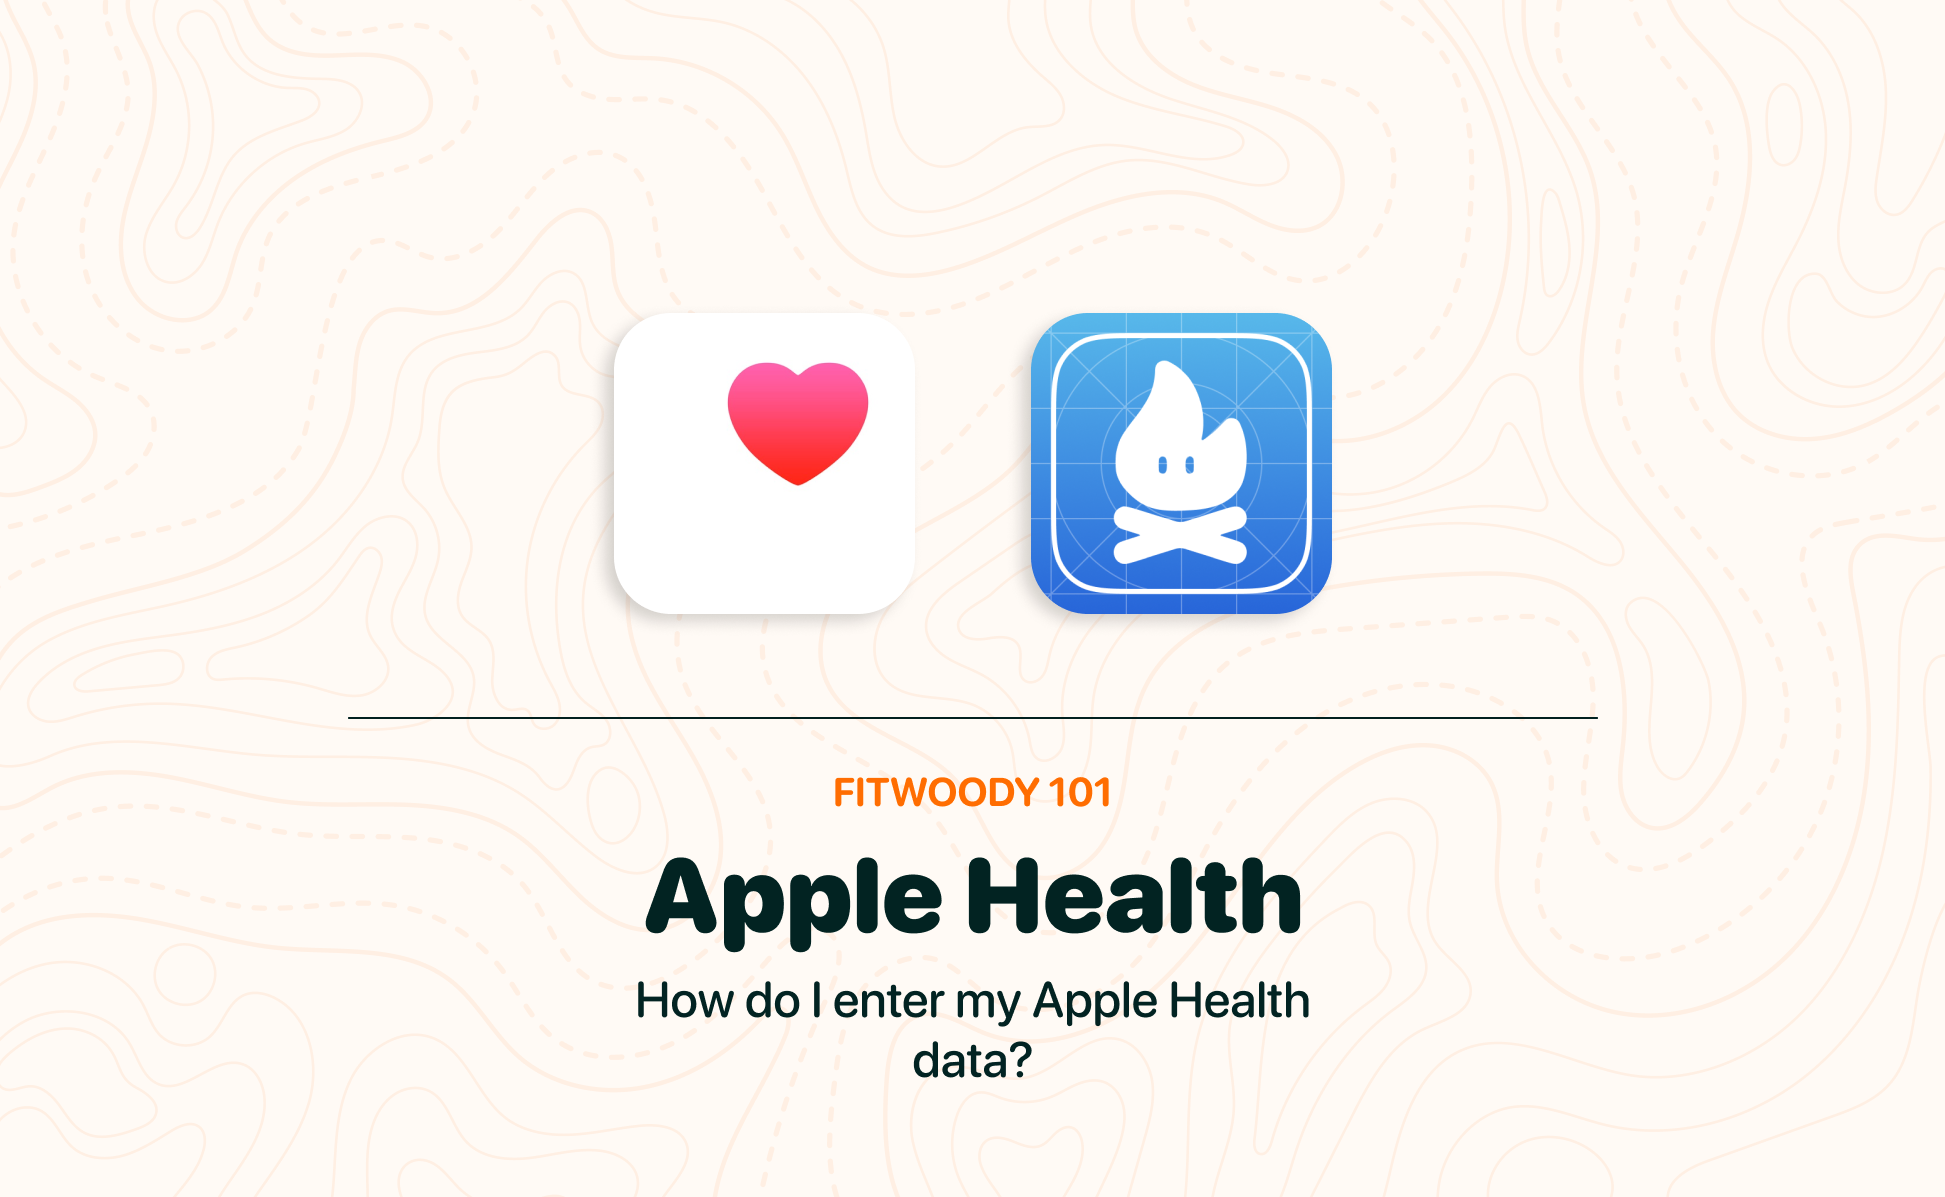 Sharing Your Apple Health Data with FitWoody